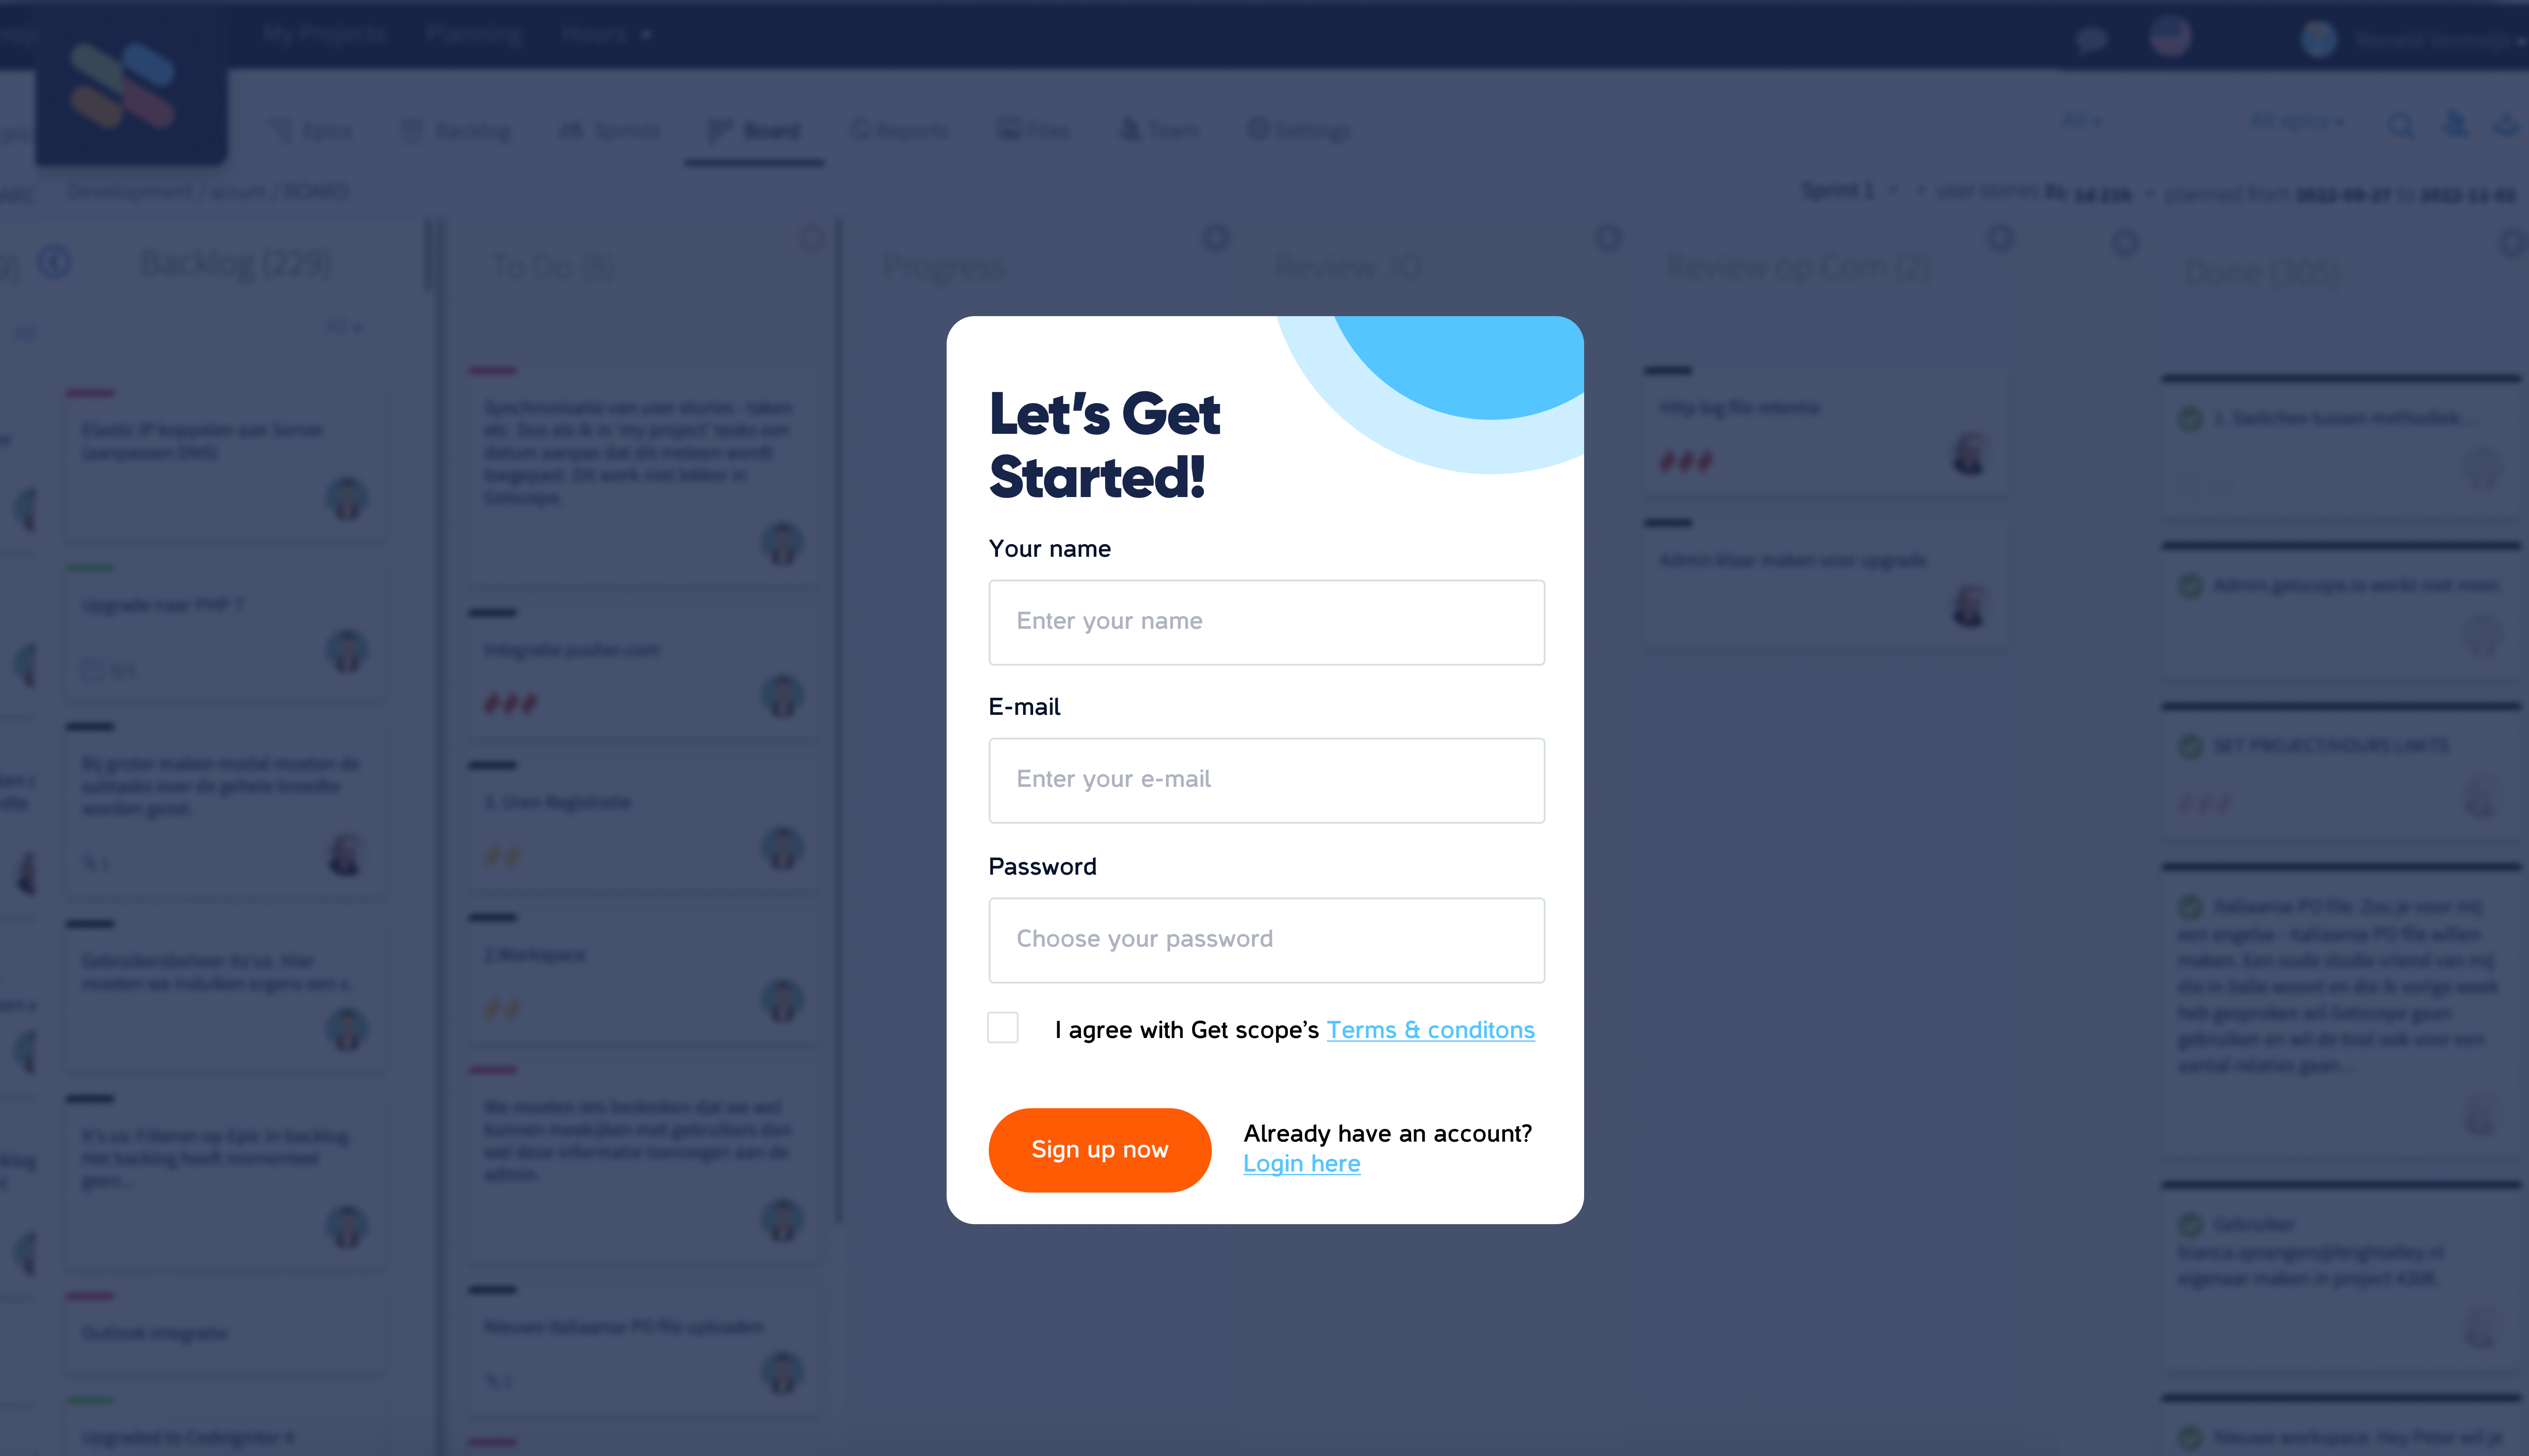 Enjoy a smooth account setup process that suits teams of all sizes. Our personalized onboarding service enables you to swiftly establish your account and add team members, enabling you to commence efficient collaboration.